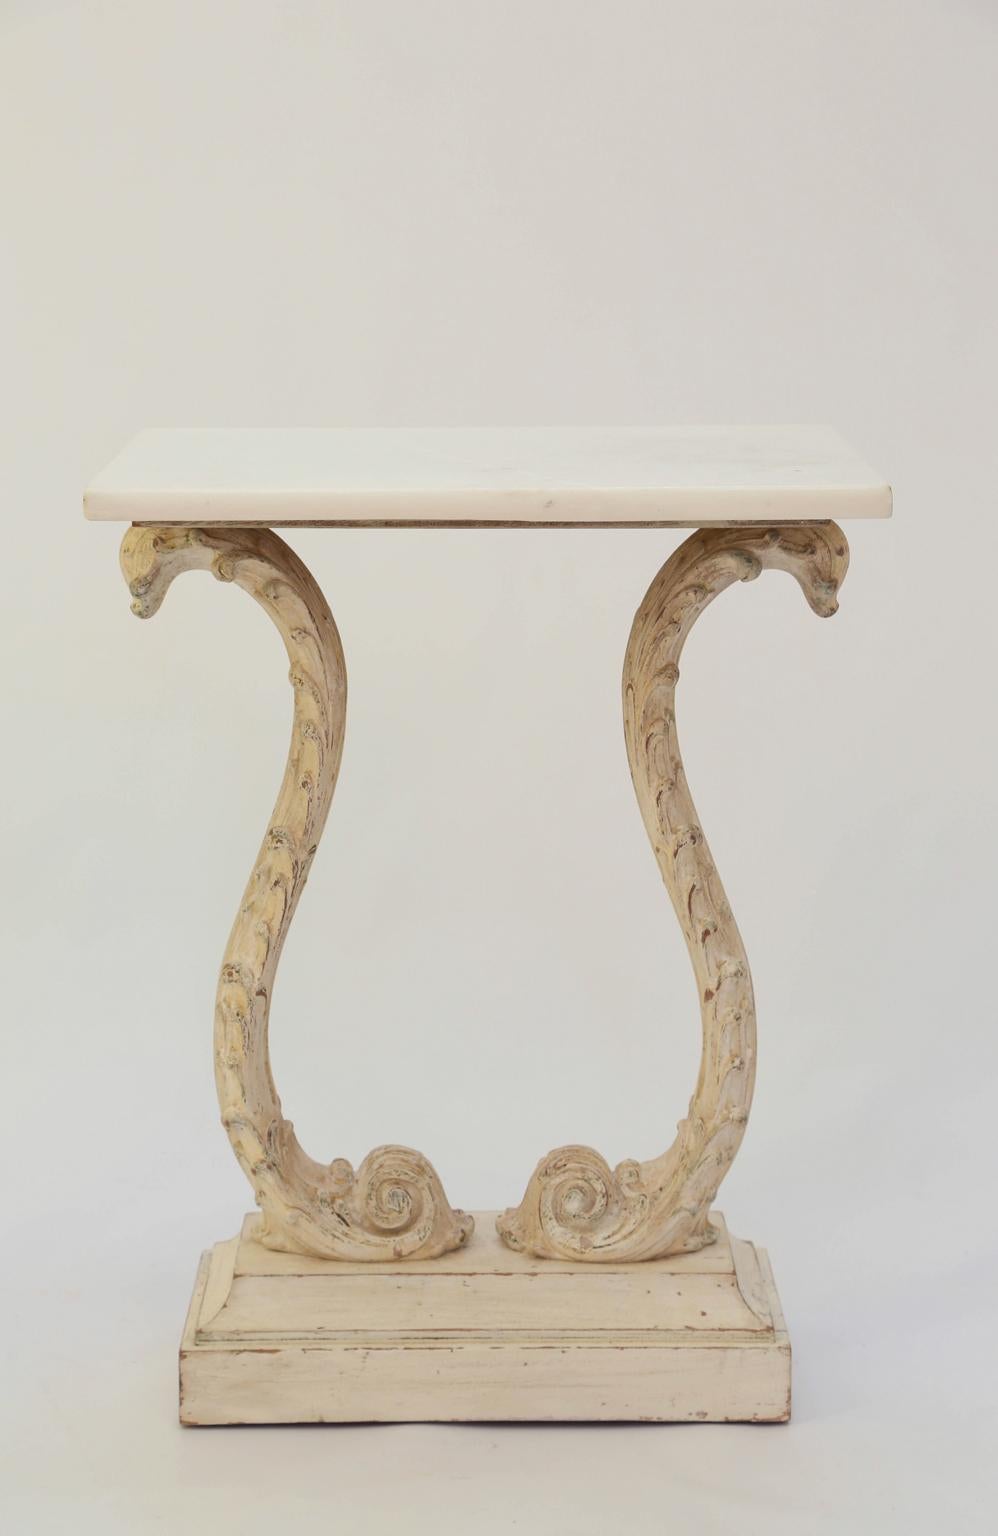 Pair of end tables, each having a rectangular top of marble, on a painted base showing natural wear; the double scrolled base carved with waves, raised on a graduated plinth.

Stock ID: D2452.